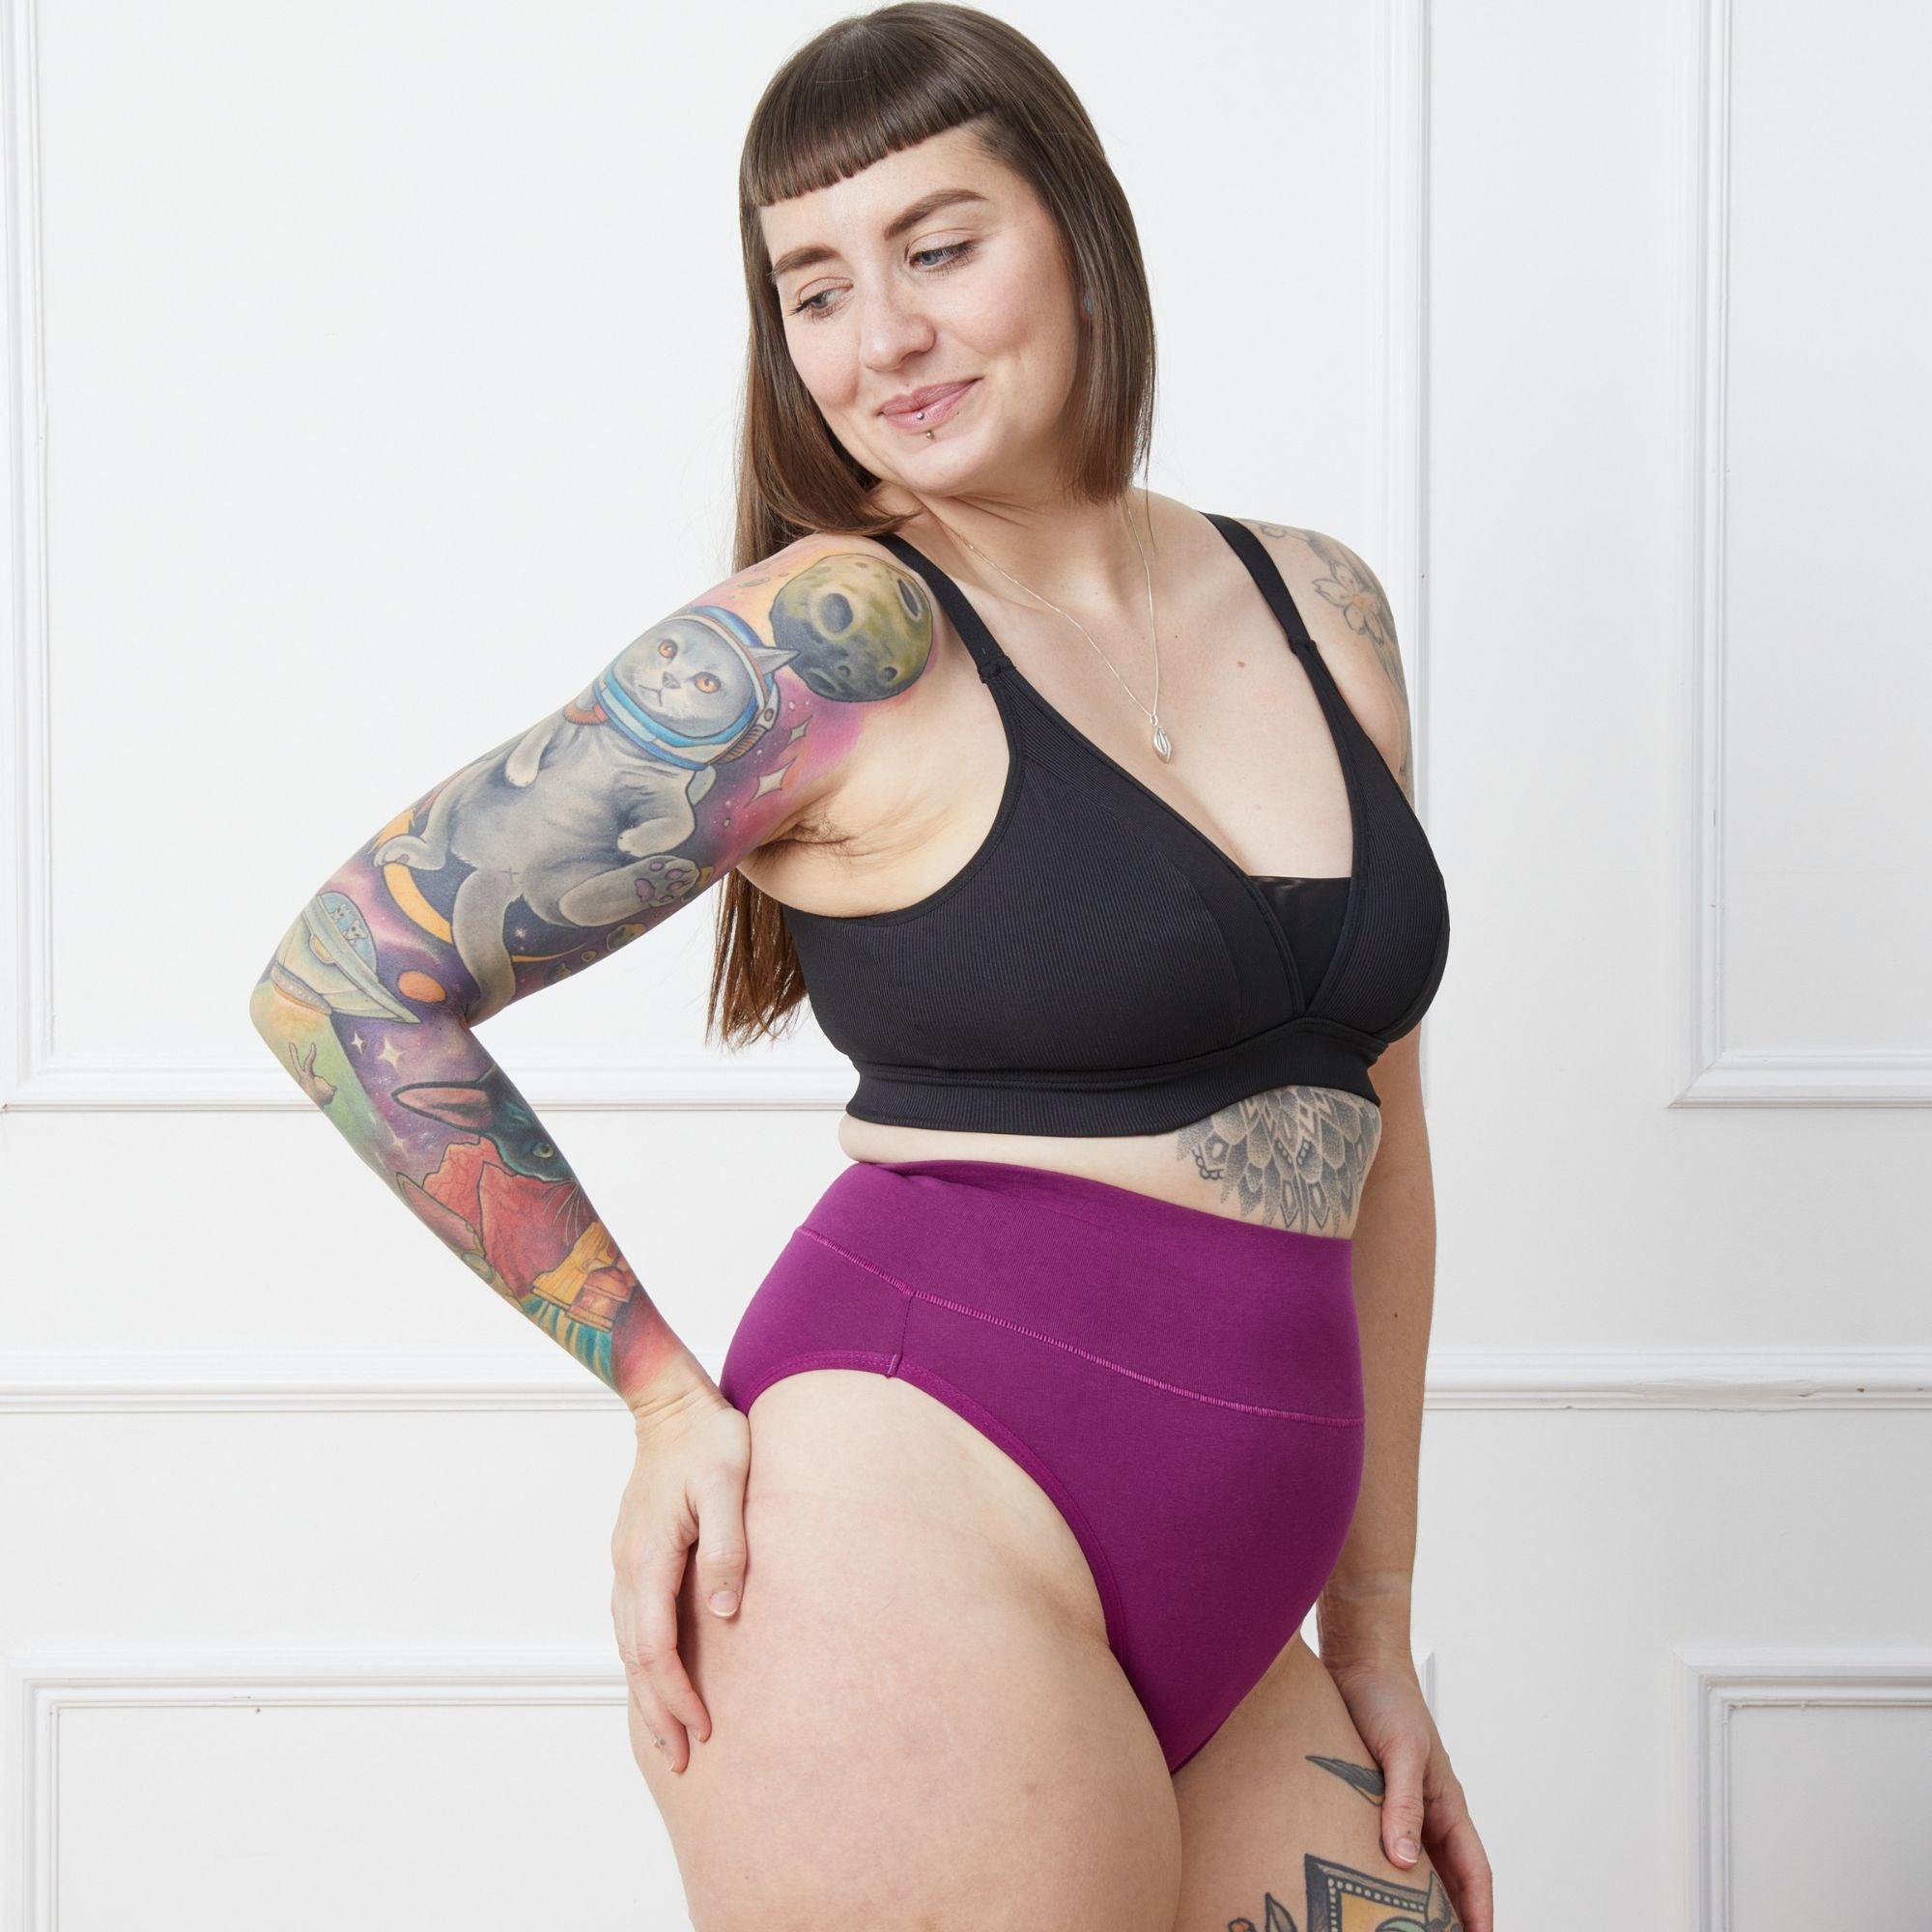 Go go go - best bra from @Snag Tights ever you won't regret it! #pluss